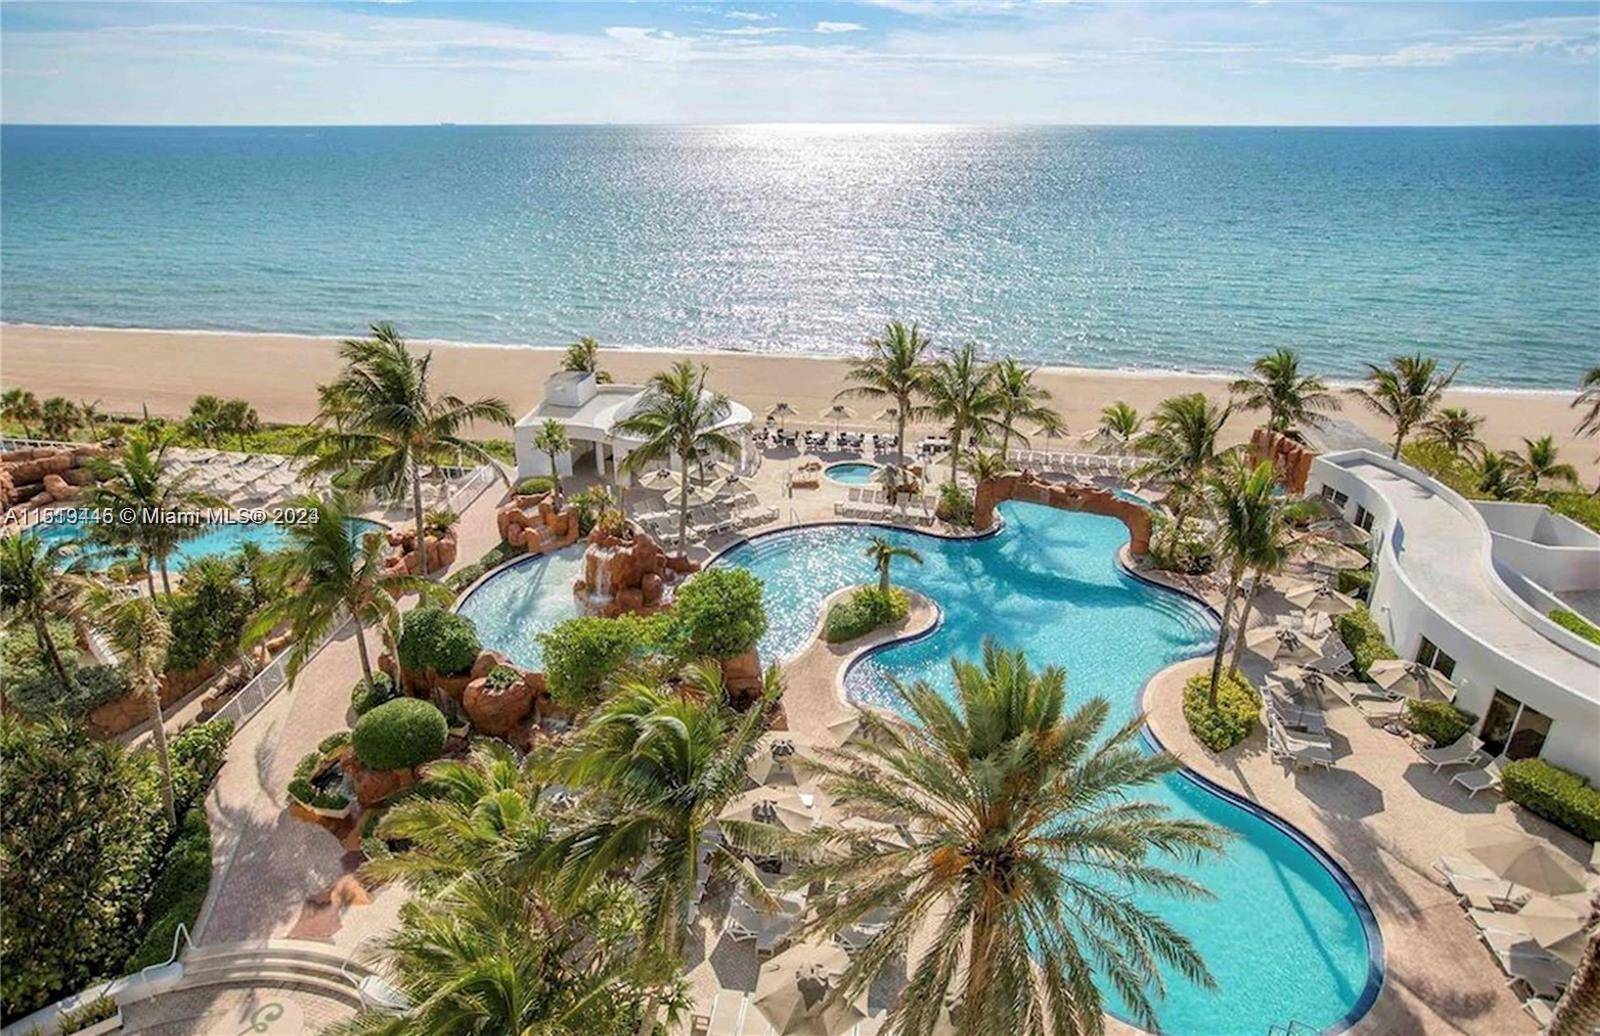 Discover the perfect blend of luxury and convenience in this waterfront condo at the prestigious Trump International Sonesta Beach Resort.